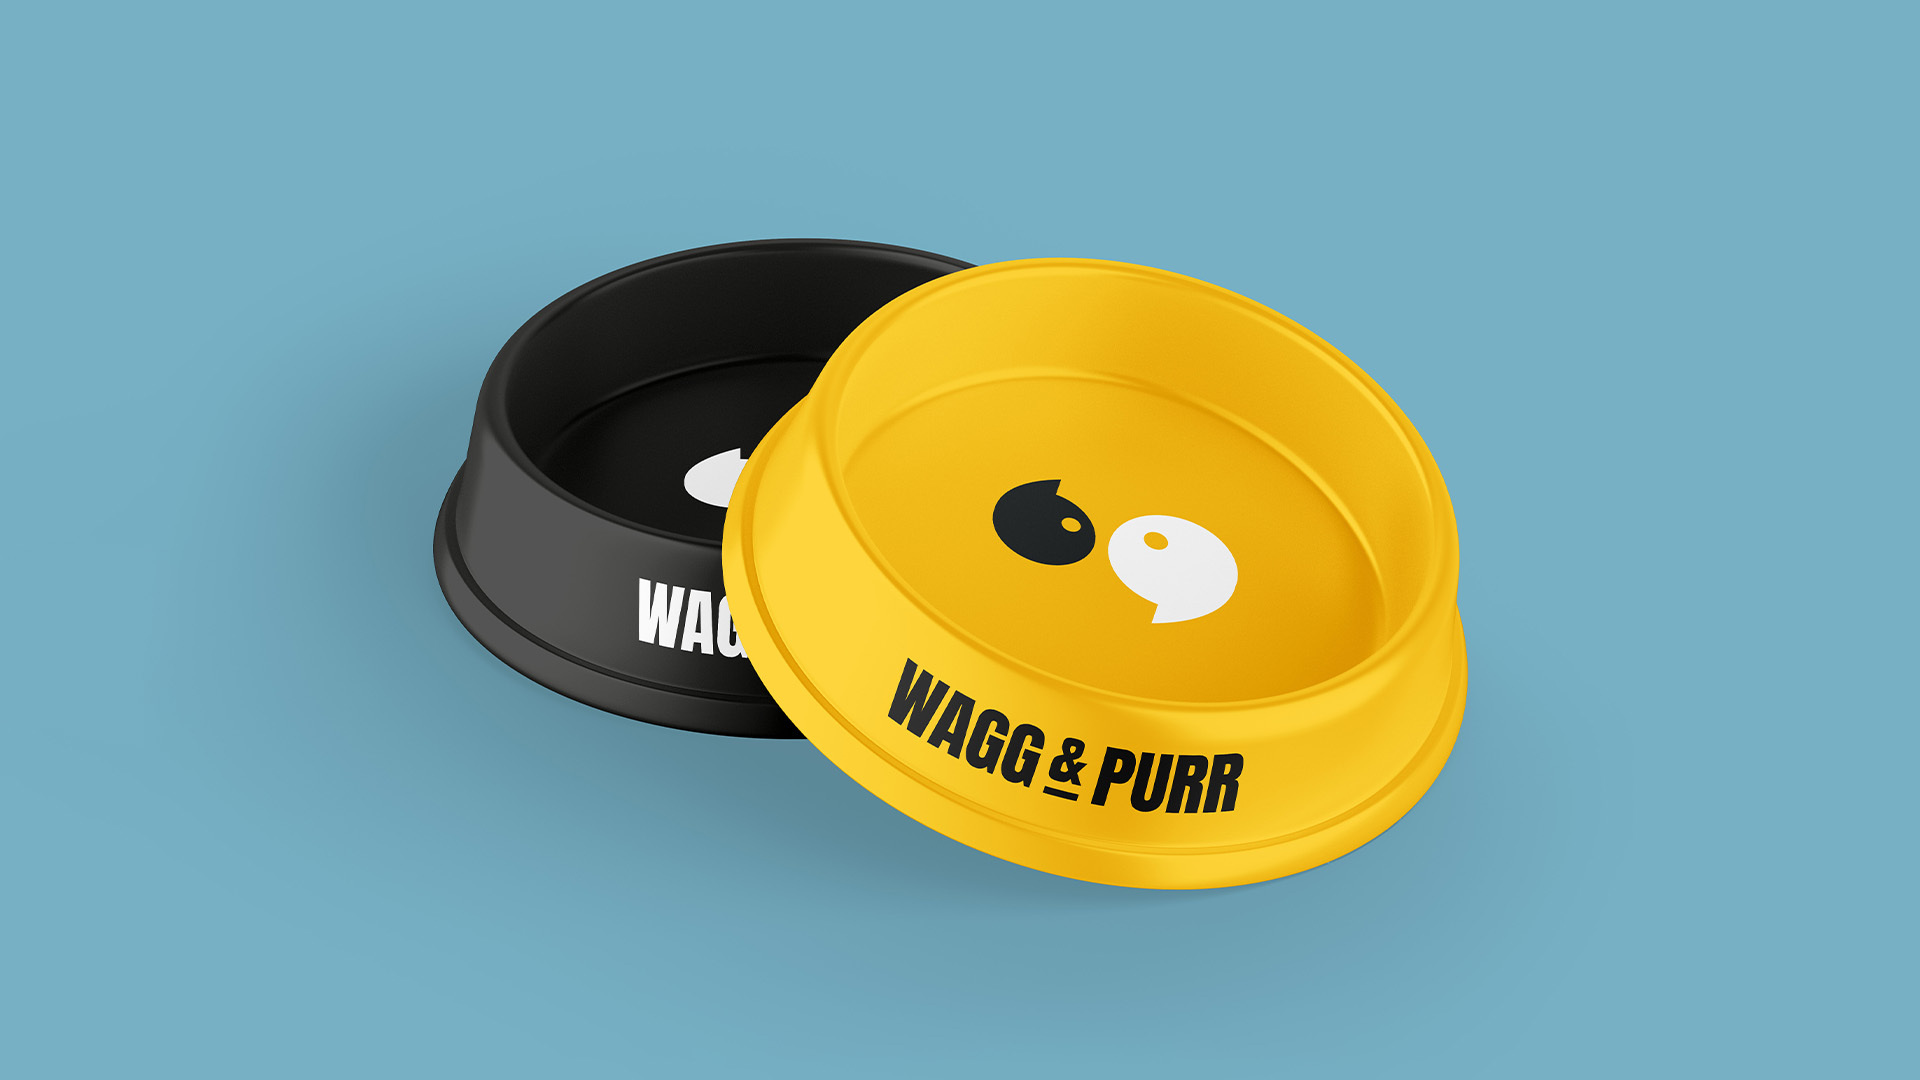 Wagg & Purr bowls